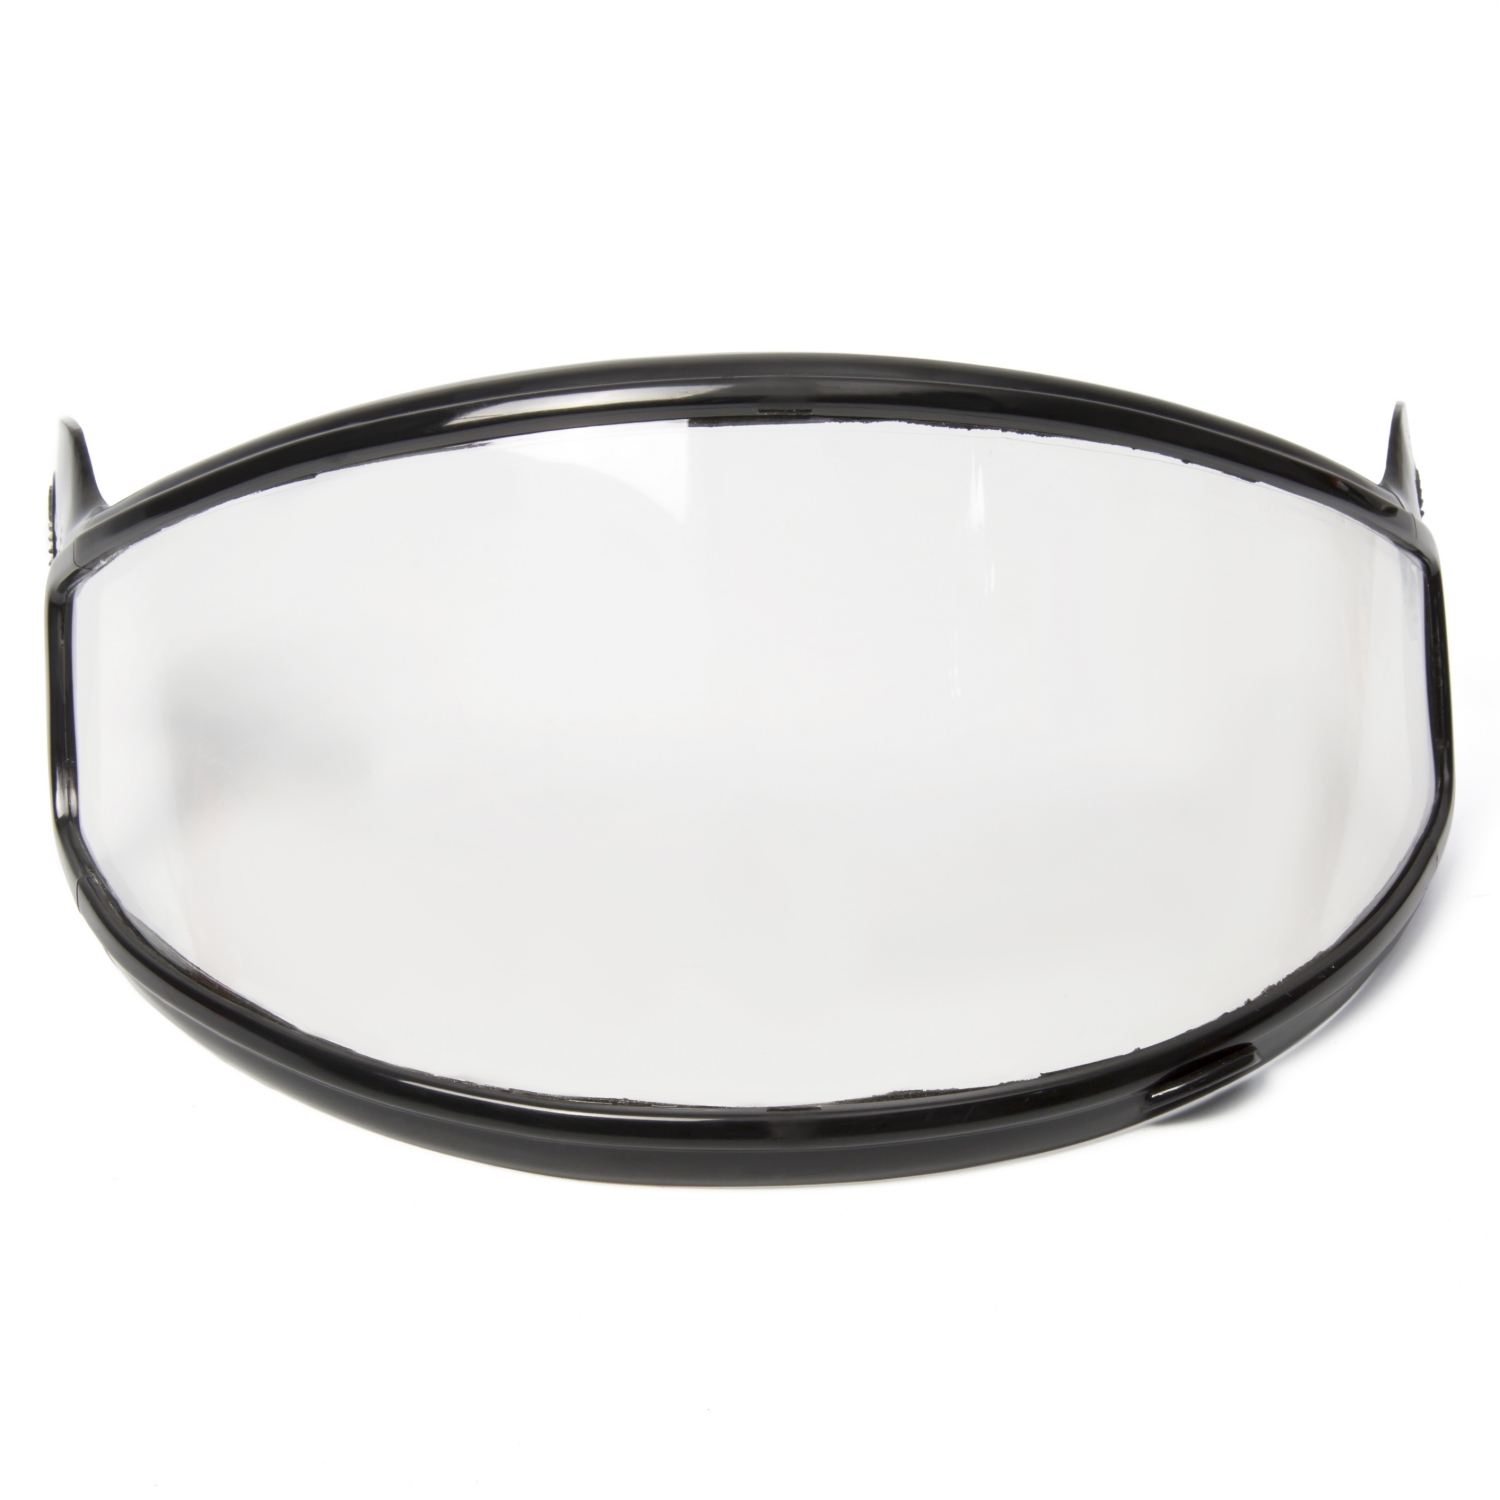 Snowmobile Kimpex CKX Replacement Double Lens Shield For RR710 Adult Helmet 